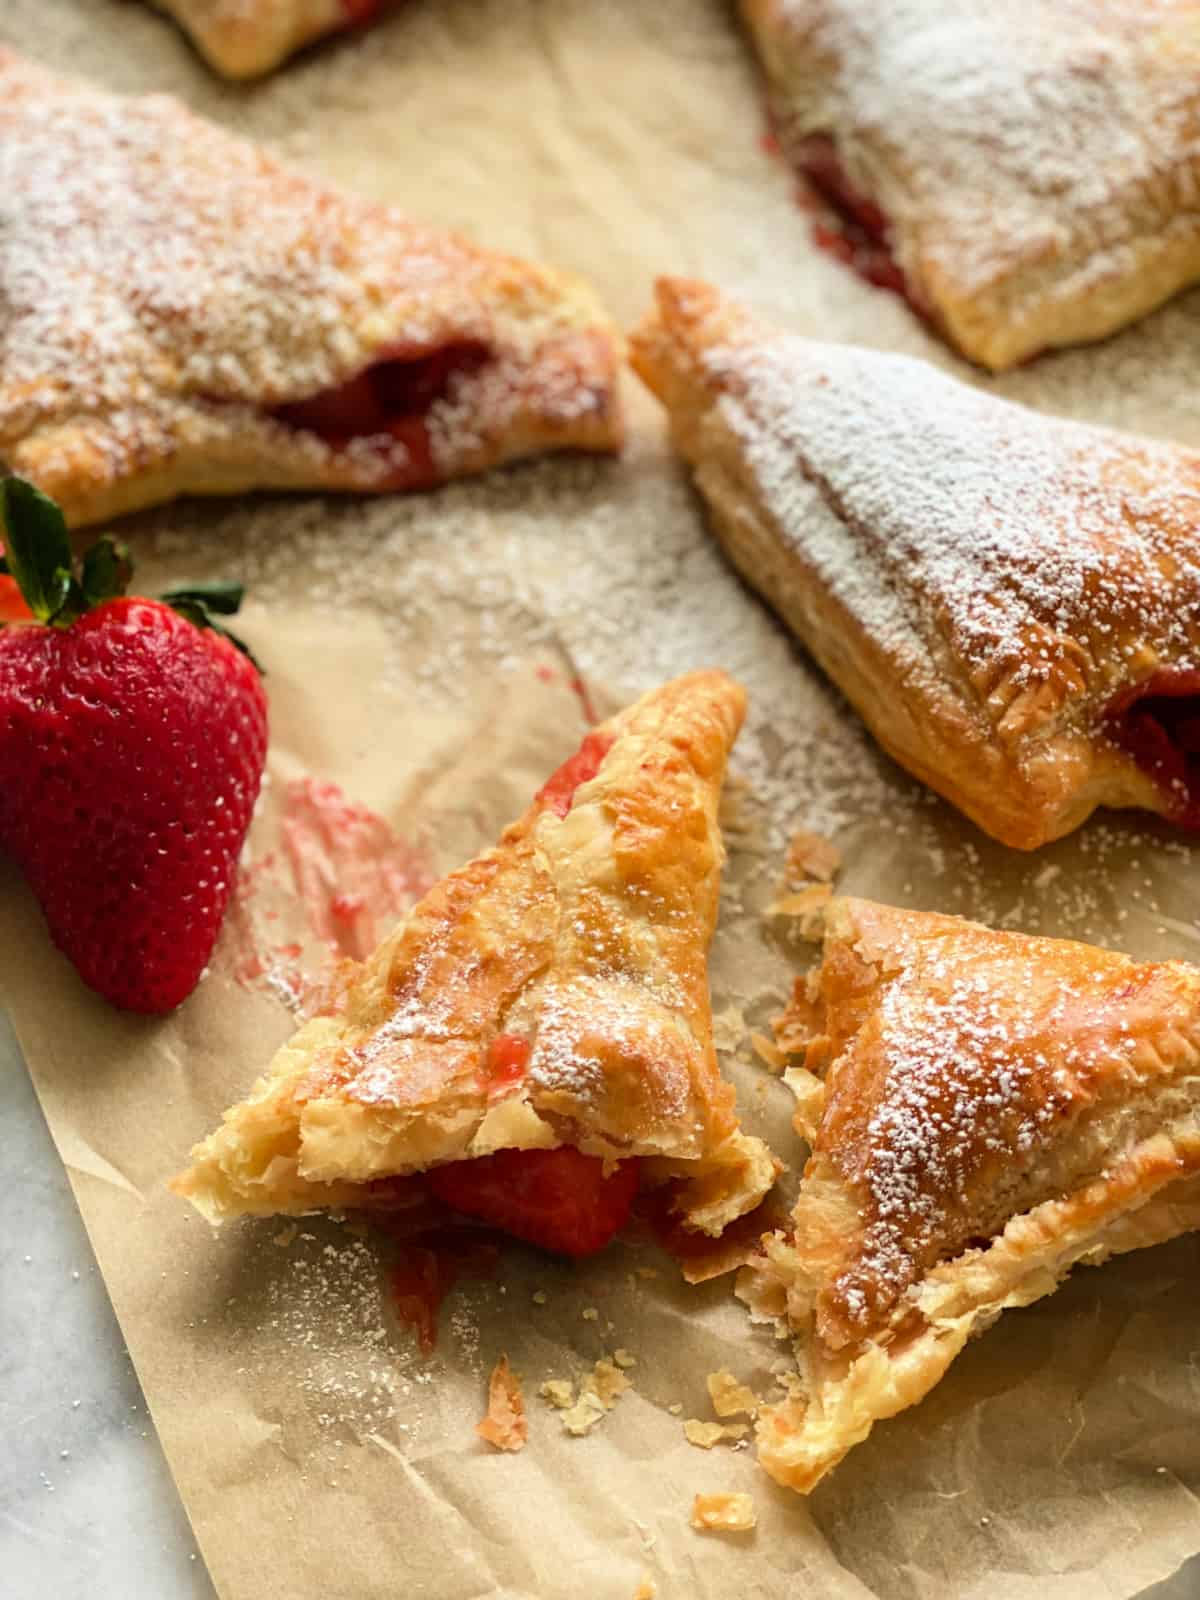 Strawberry turnover cut in half on brown parchment paper.